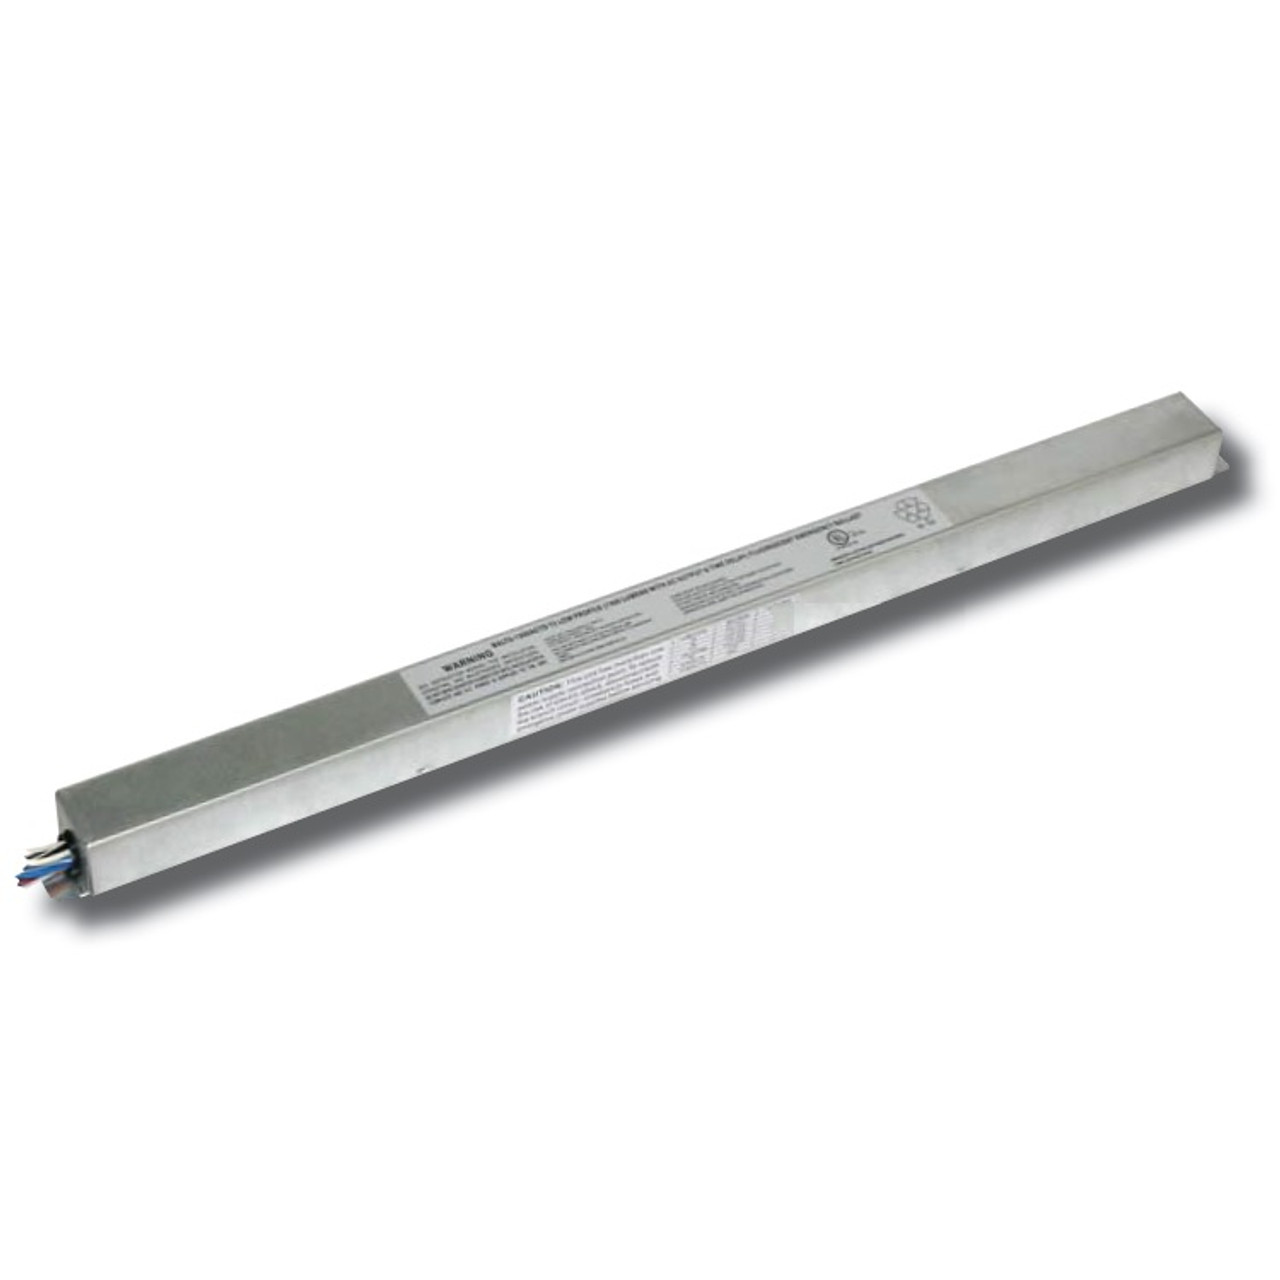 Works with or without an AC ballast to convert new or existing fluorescent fixtures in to unobtrusive emergency lighting.
Operates one or two lamps in the emergency mode for a minimum of 90-minutes.
Provides a maximum initial lumen output of 1300 lumens.
Dual 120/277 voltage.
Charge rate/power “ON” LED indicator light and push-to-test switch for mandated code compliance testing.
8.4V long life, maintenance-free, rechargeable sealed NiCd battery.
Internal solid-state transfer switch automatically connects the internal battery to fluorescent lamp for minimum
90-minute emergency illumination.
Fully automatic solid-state, two rate charger initiates battery charging to recharge a discharged battery in 24 hours.
Time delay enhancement to overcome end-of-life circuit protection.
Suitable for installation inside, on top or in remote* of the fixture.
Can be used in both switched and unswitched fixtures.
UL Listed for factory or field installation.